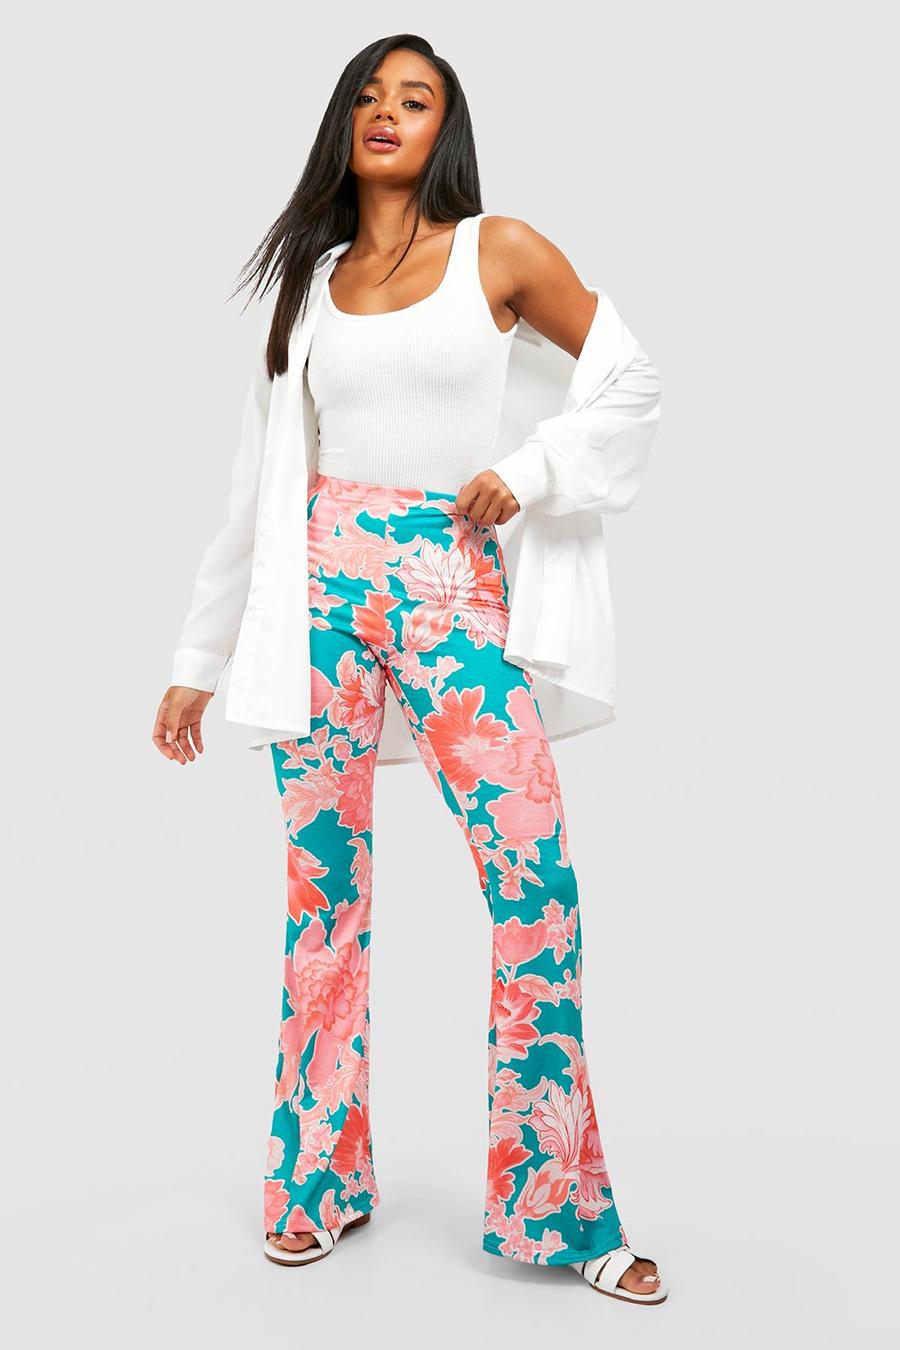  CHGBMOK Womens Elastic Waist Linen Pants Floral Printed Tapered  Trousers Casual Solid Wide Leg Lounge Pants with Pockets : Sports & Outdoors